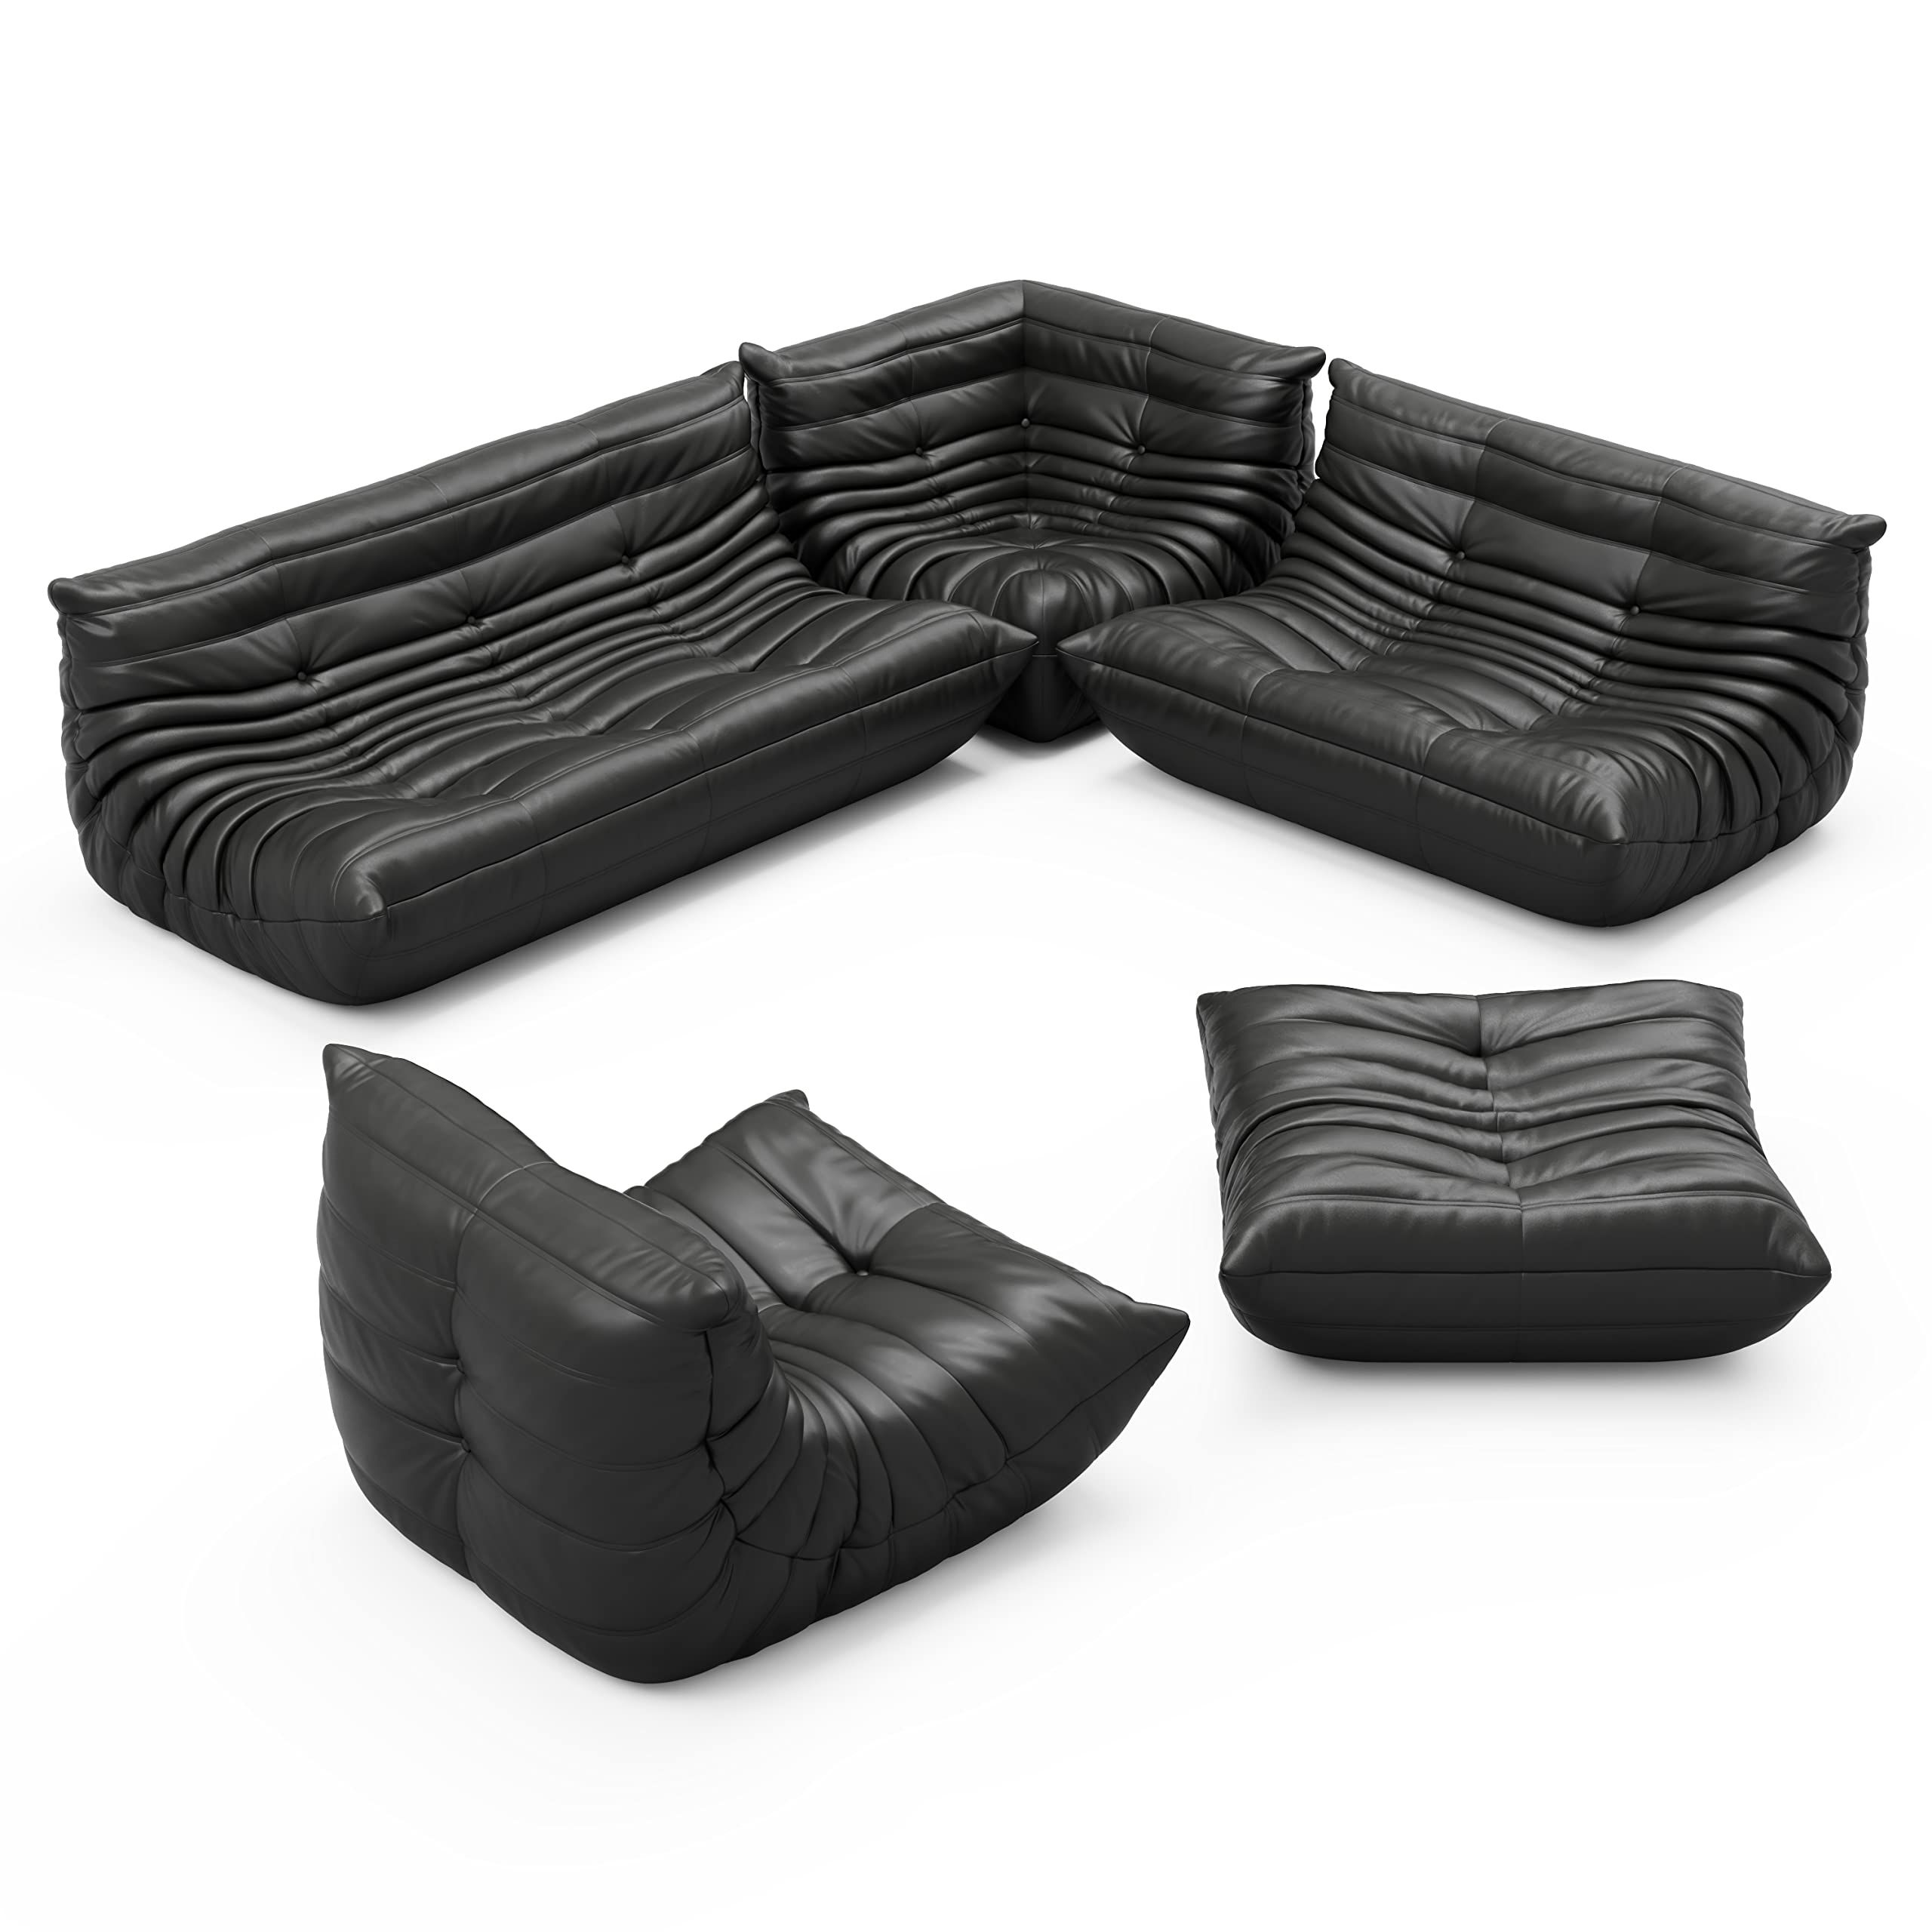 What is a living room sofa loveseat set ?